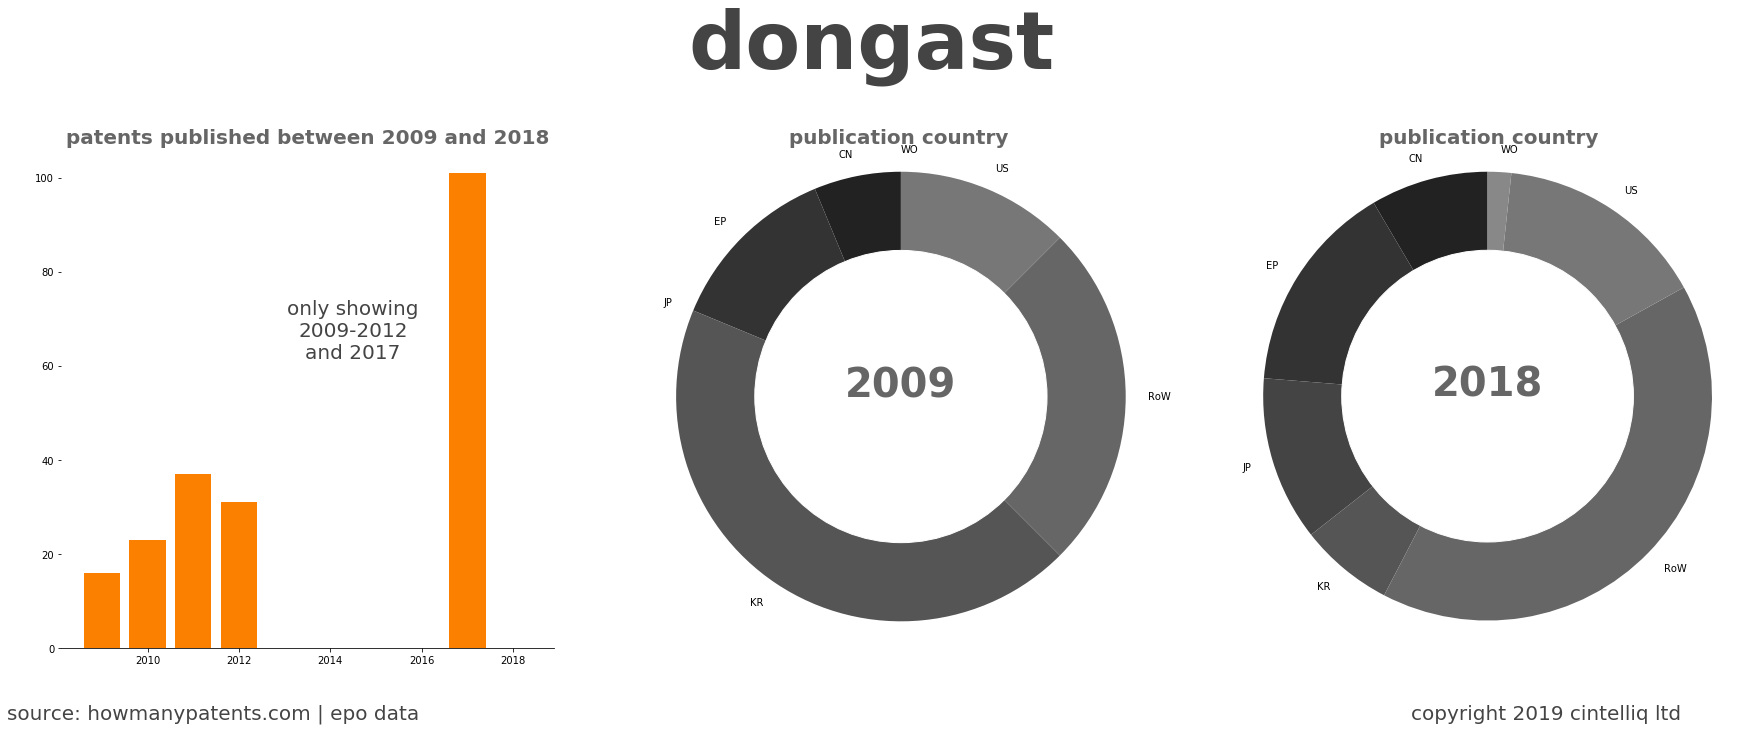 summary of patents for Dongast